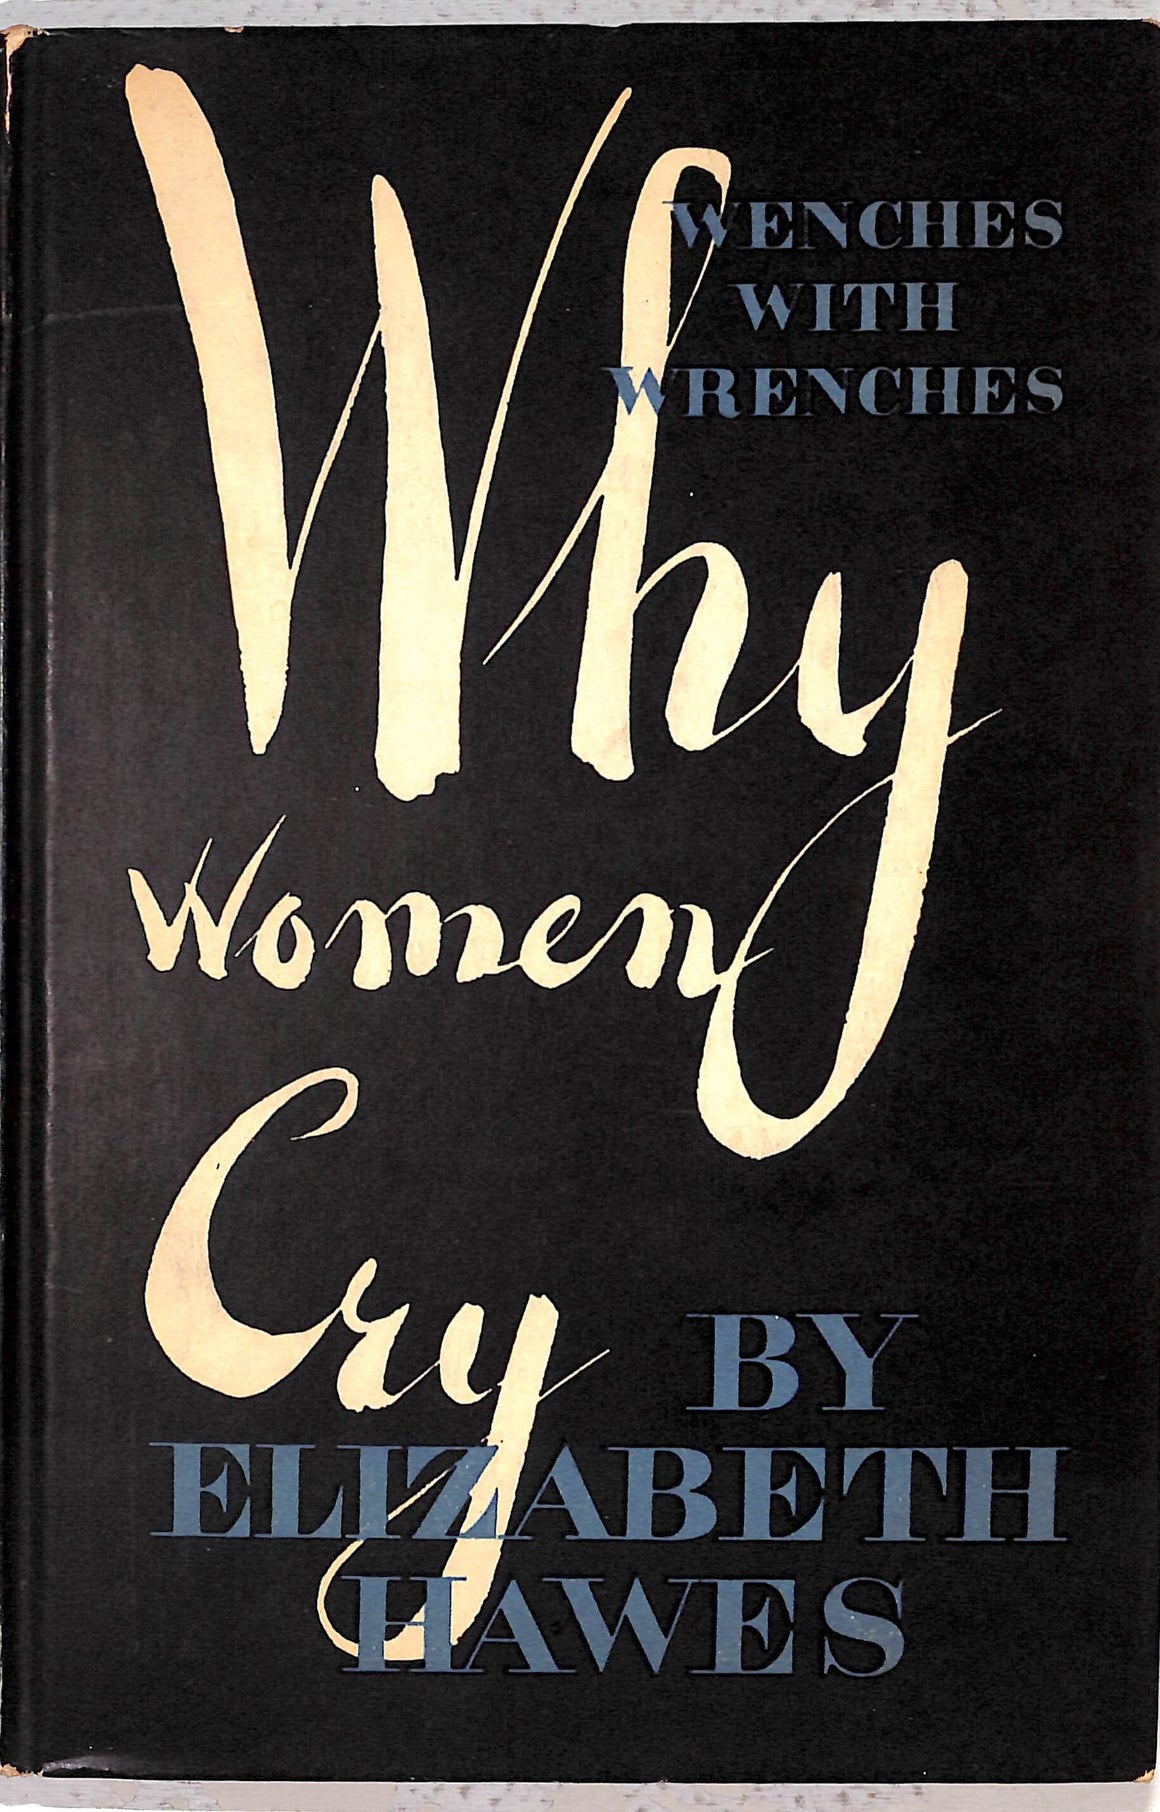 "Why Women Cry Or Wenches With Wrenches" 1943 HAWES, Elizabeth